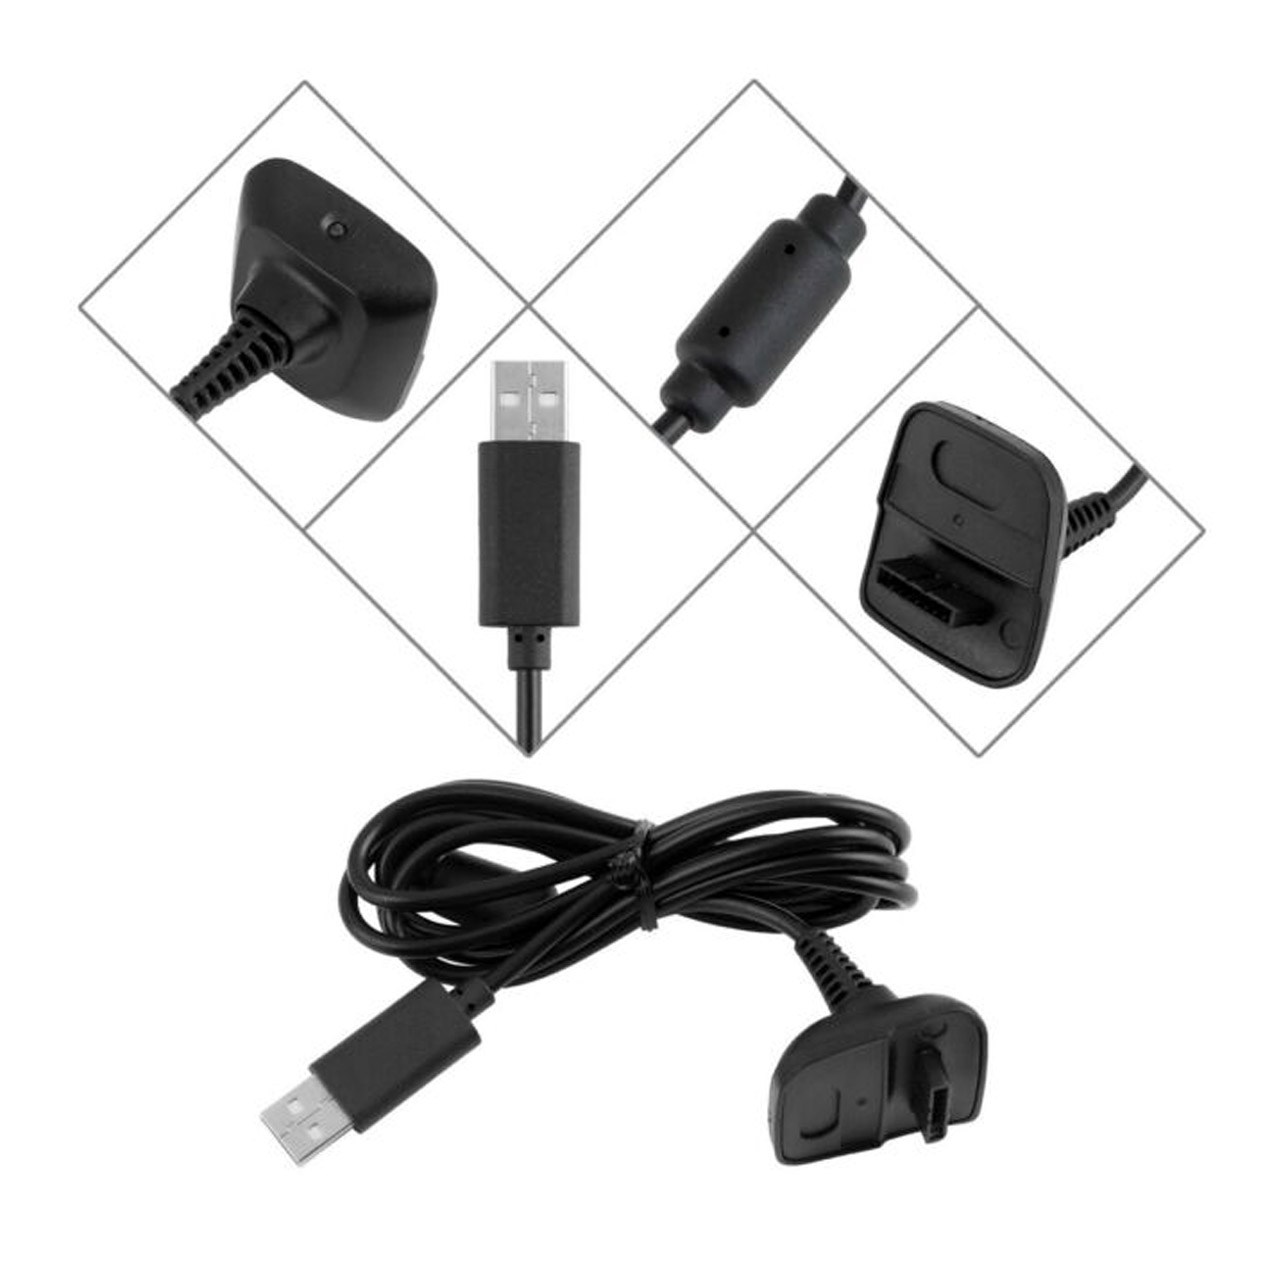 Dedicated Charging and Connecting 2 in 1 Cable for XBox 360